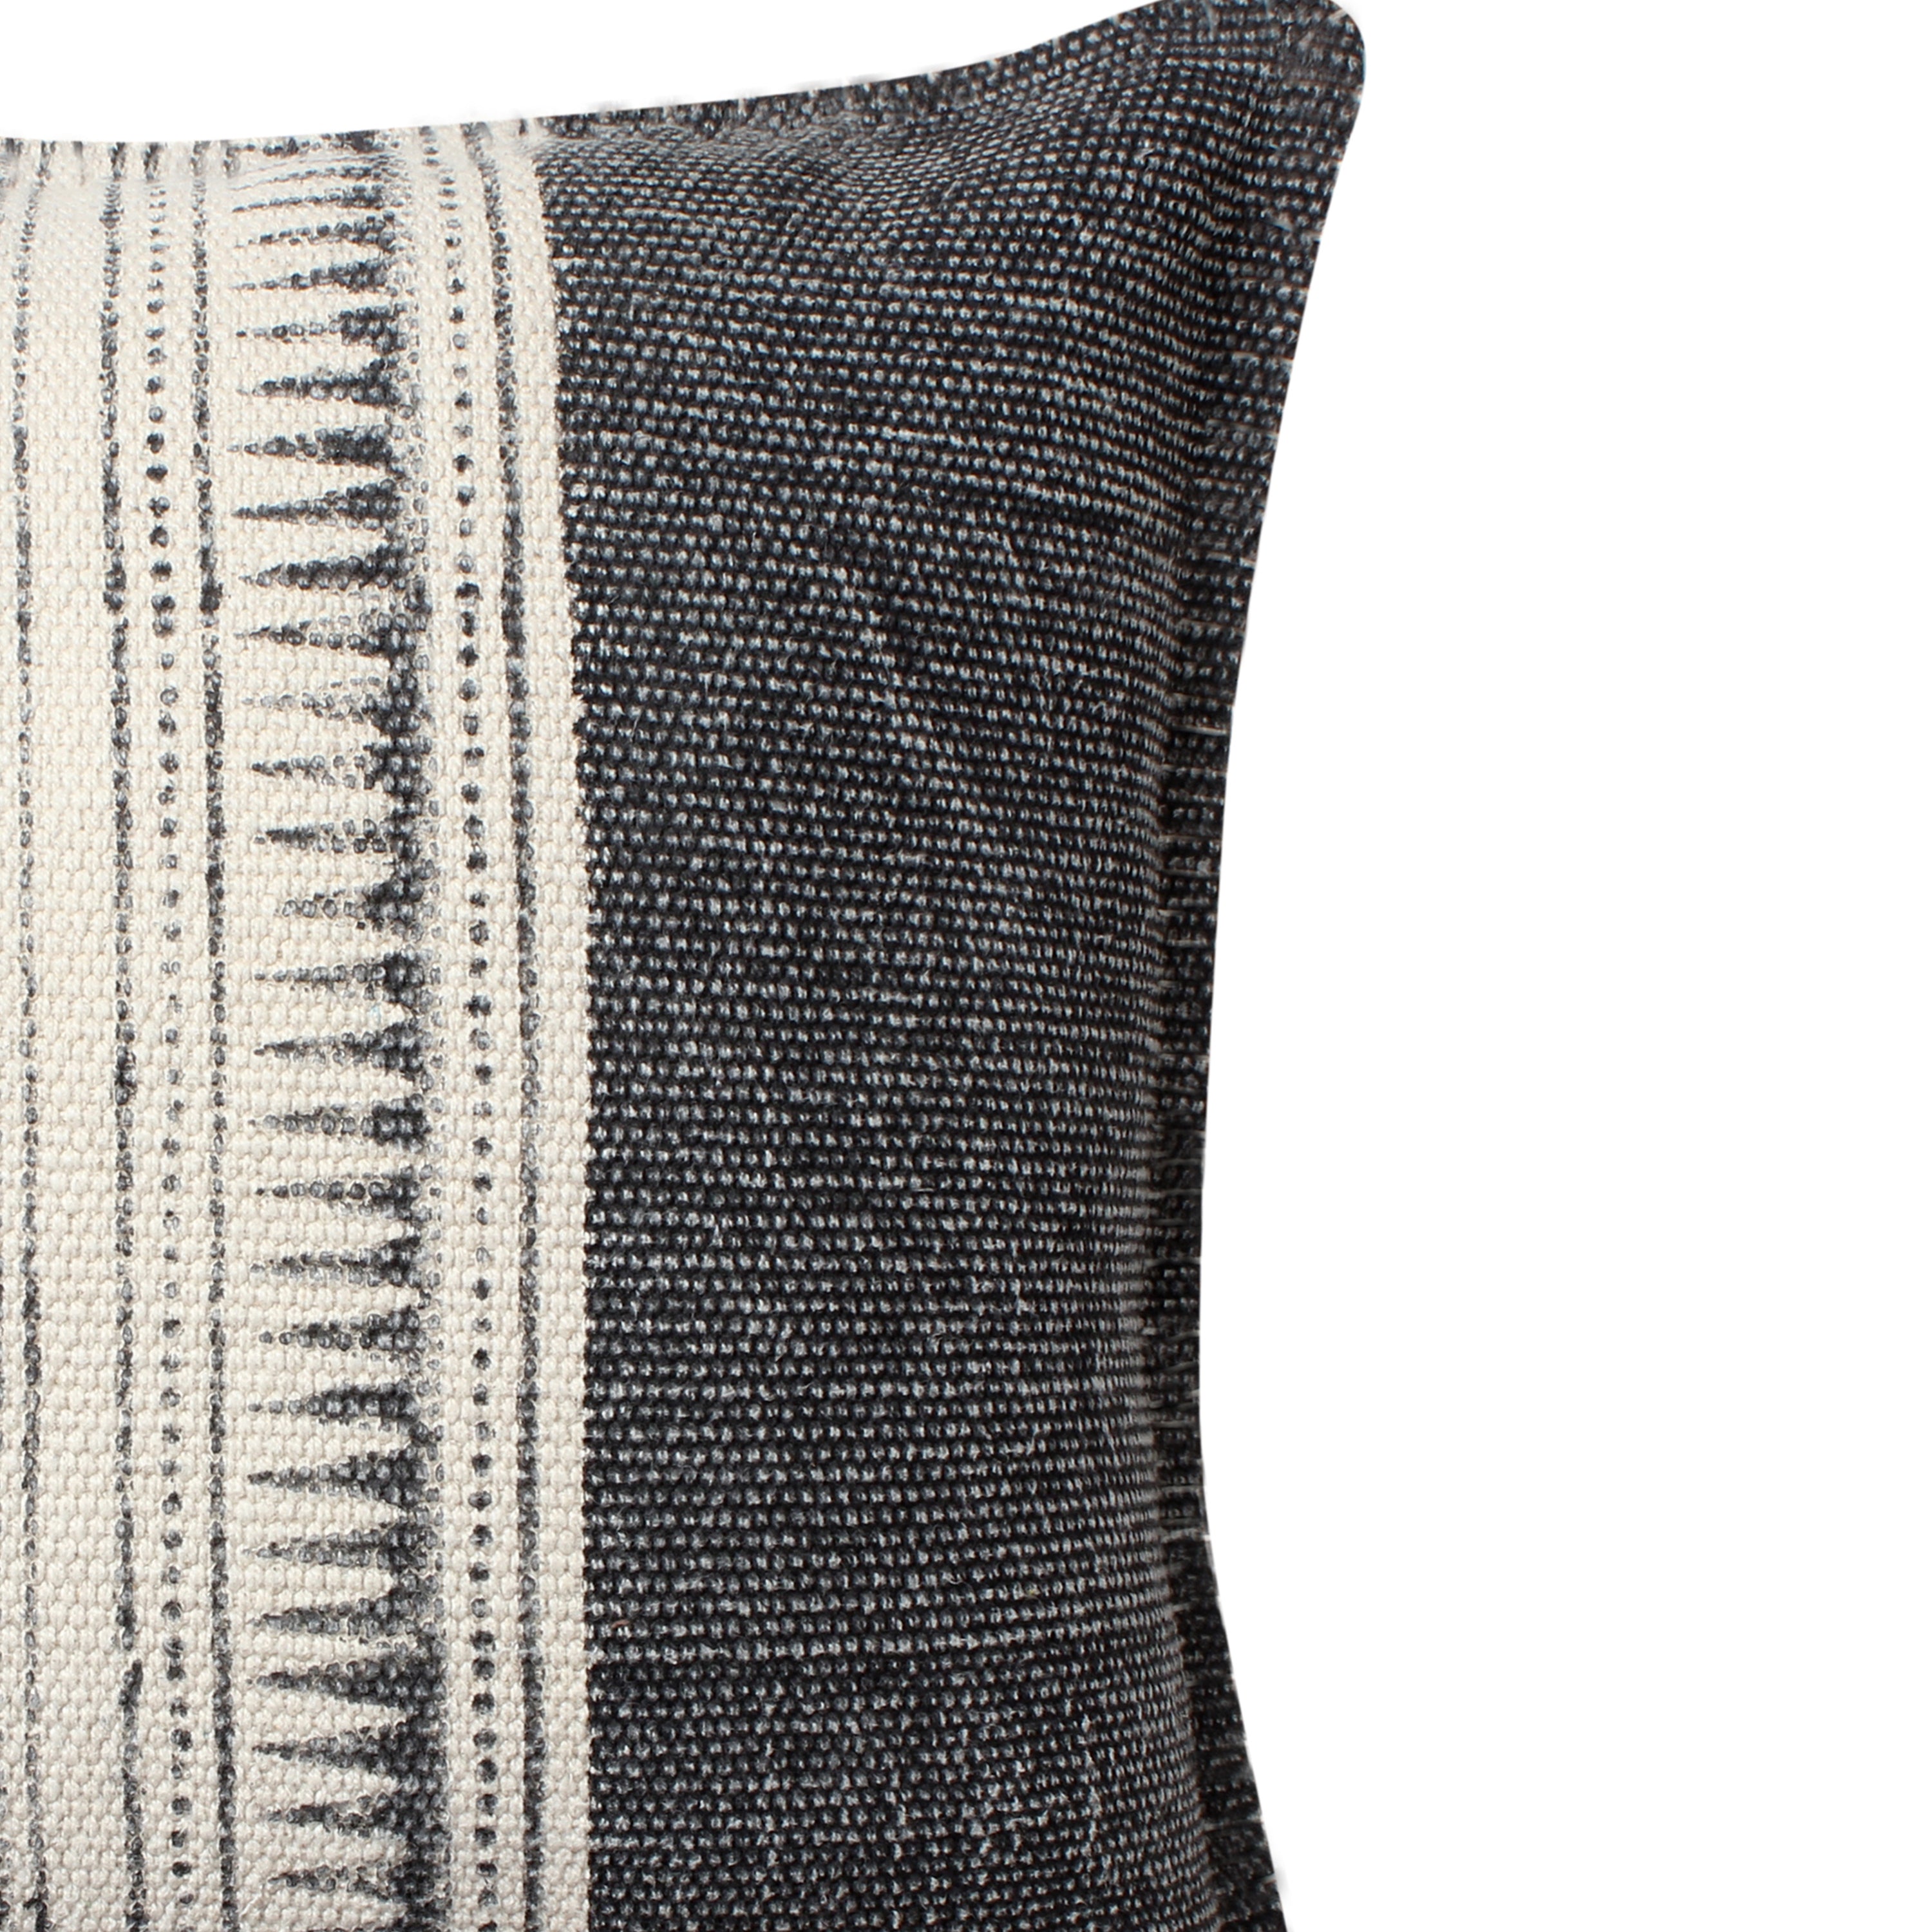 Square Handwoven Accent Throw Pillow, Polycotton Dhurrie, Kilim Pattern - White & Gray